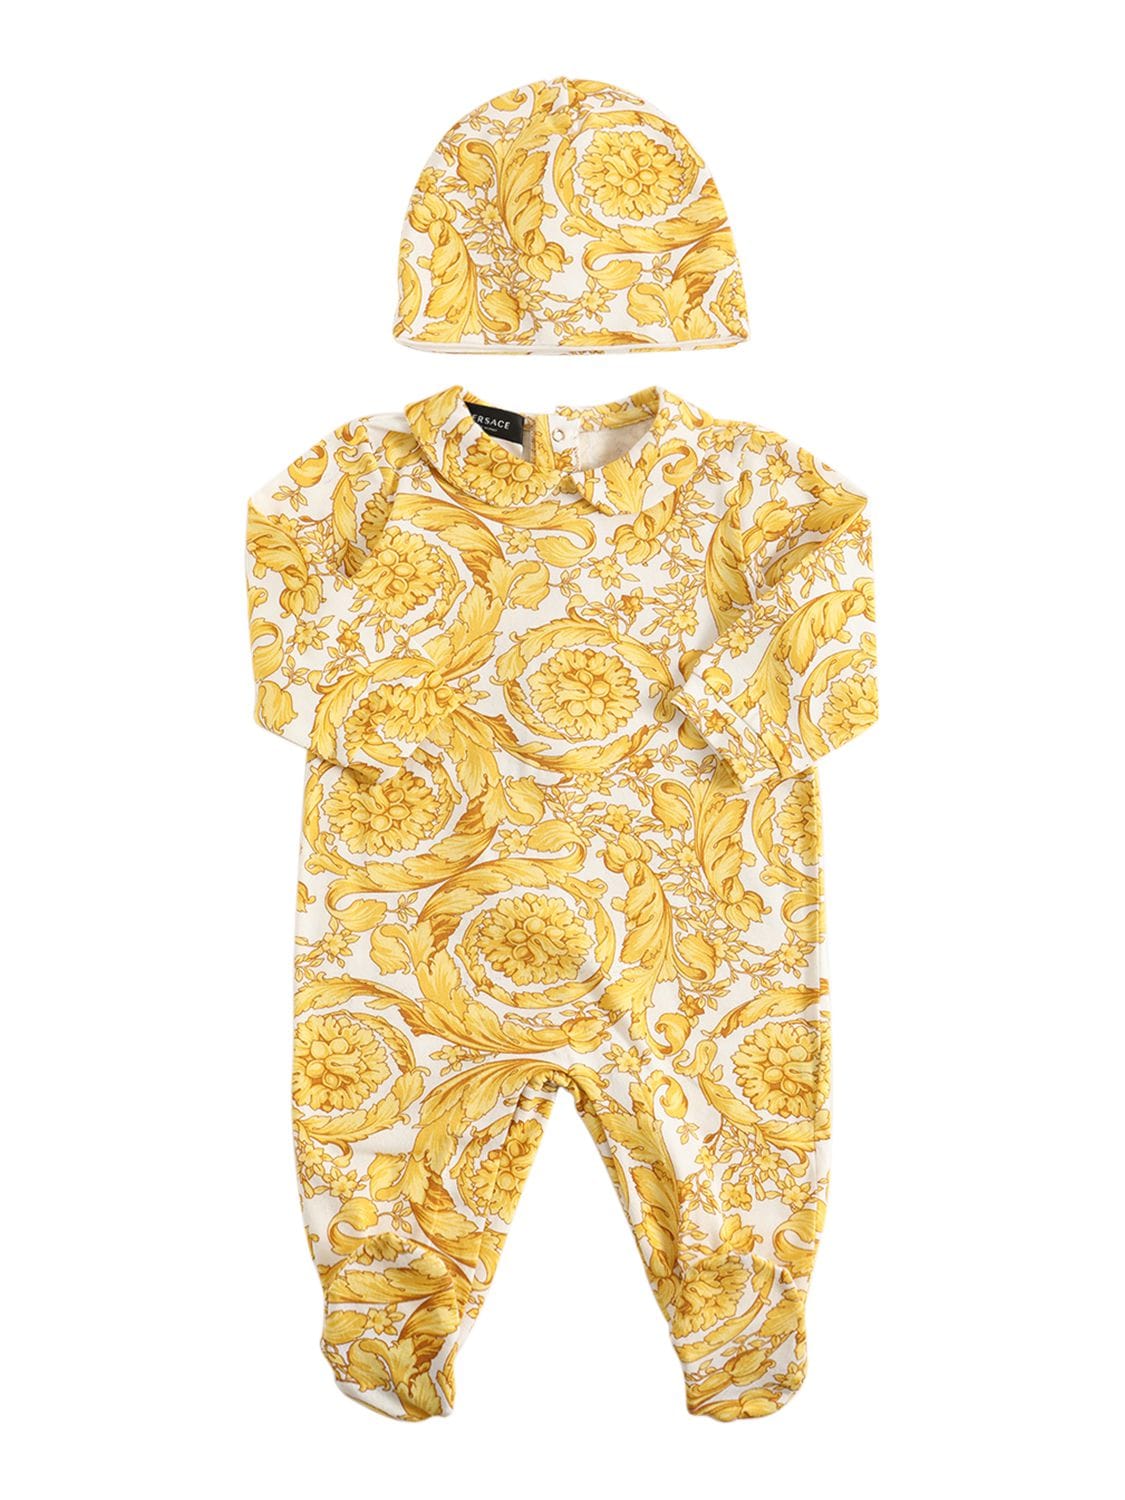 Image of Barocco Printed Cotton Romper & Hat